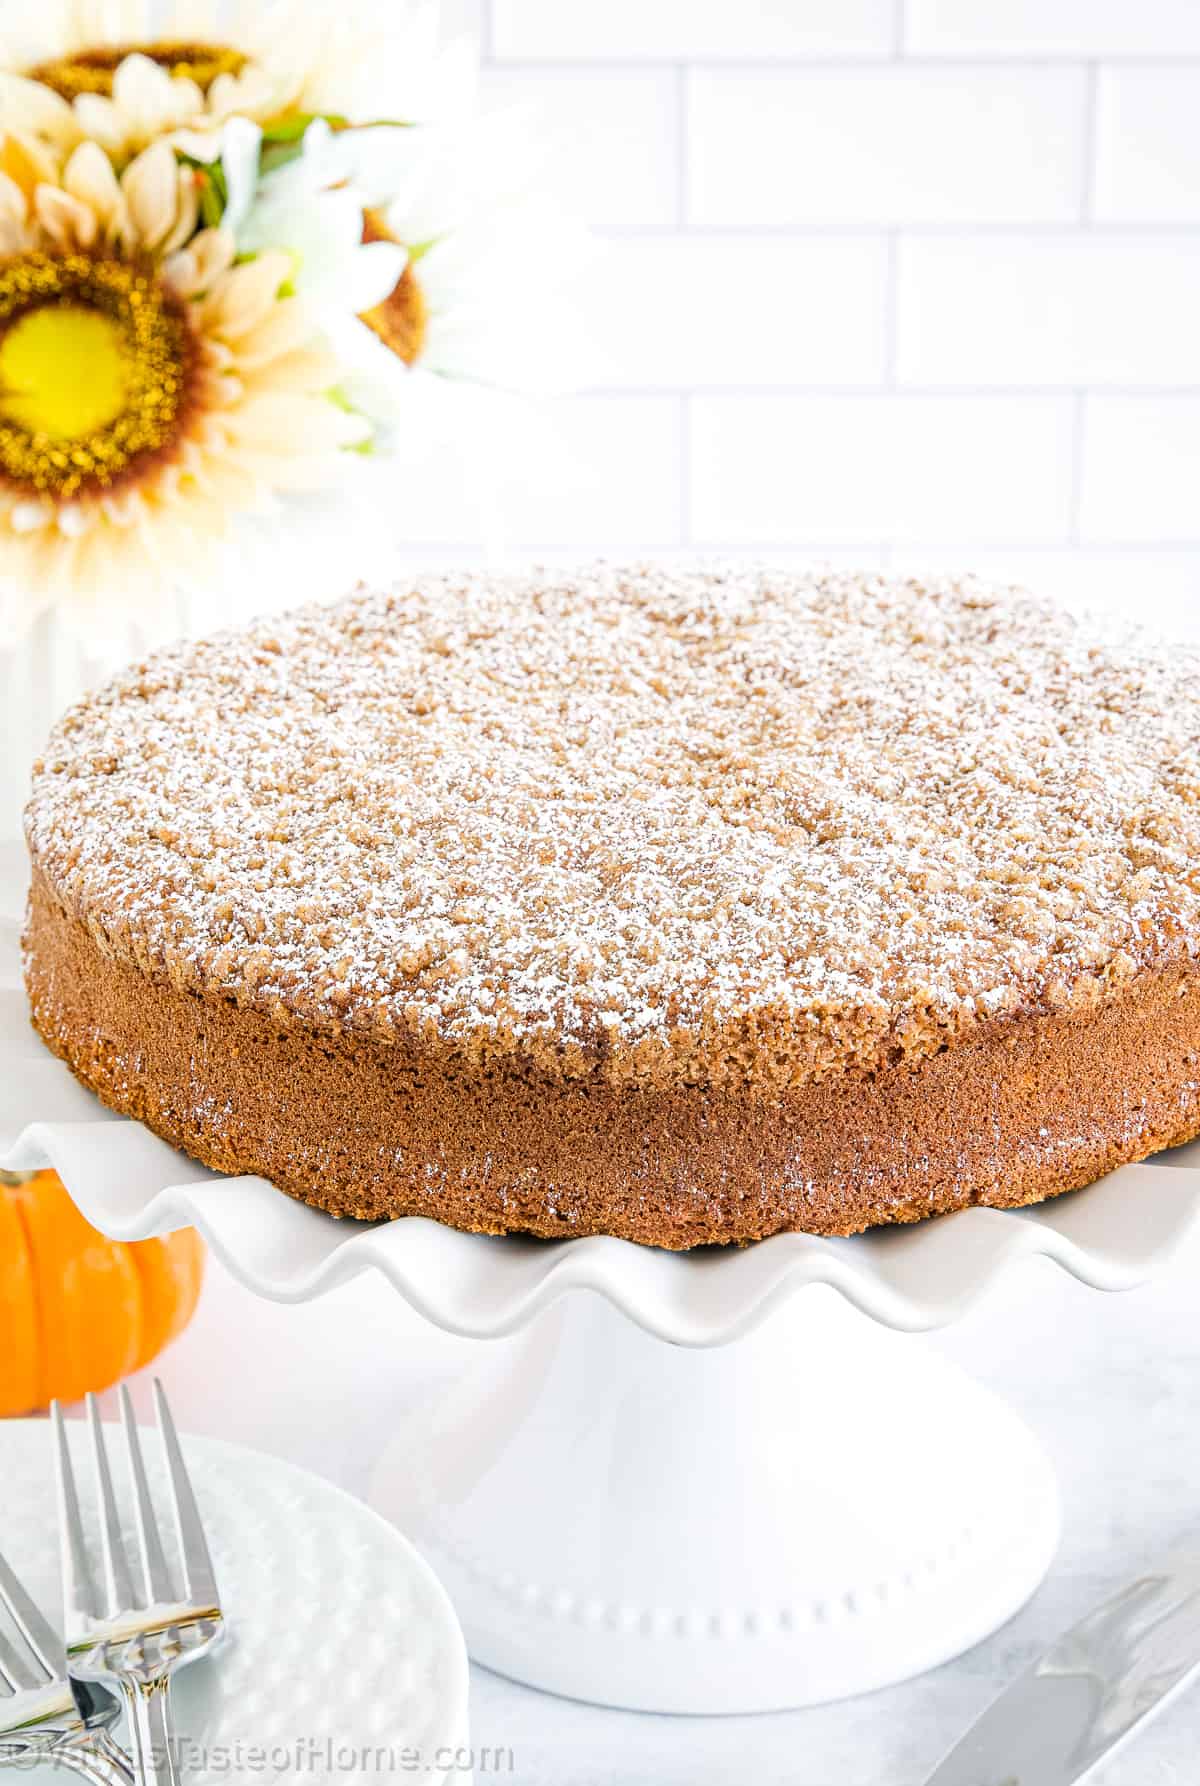 My pumpkin coffee cake is more than just a dessert, it’s an experience. Each bite takes you on a journey, from the sweet and spicy pumpkin pie filling, through the soft and moist cake, to the crunchy streusel topping. 